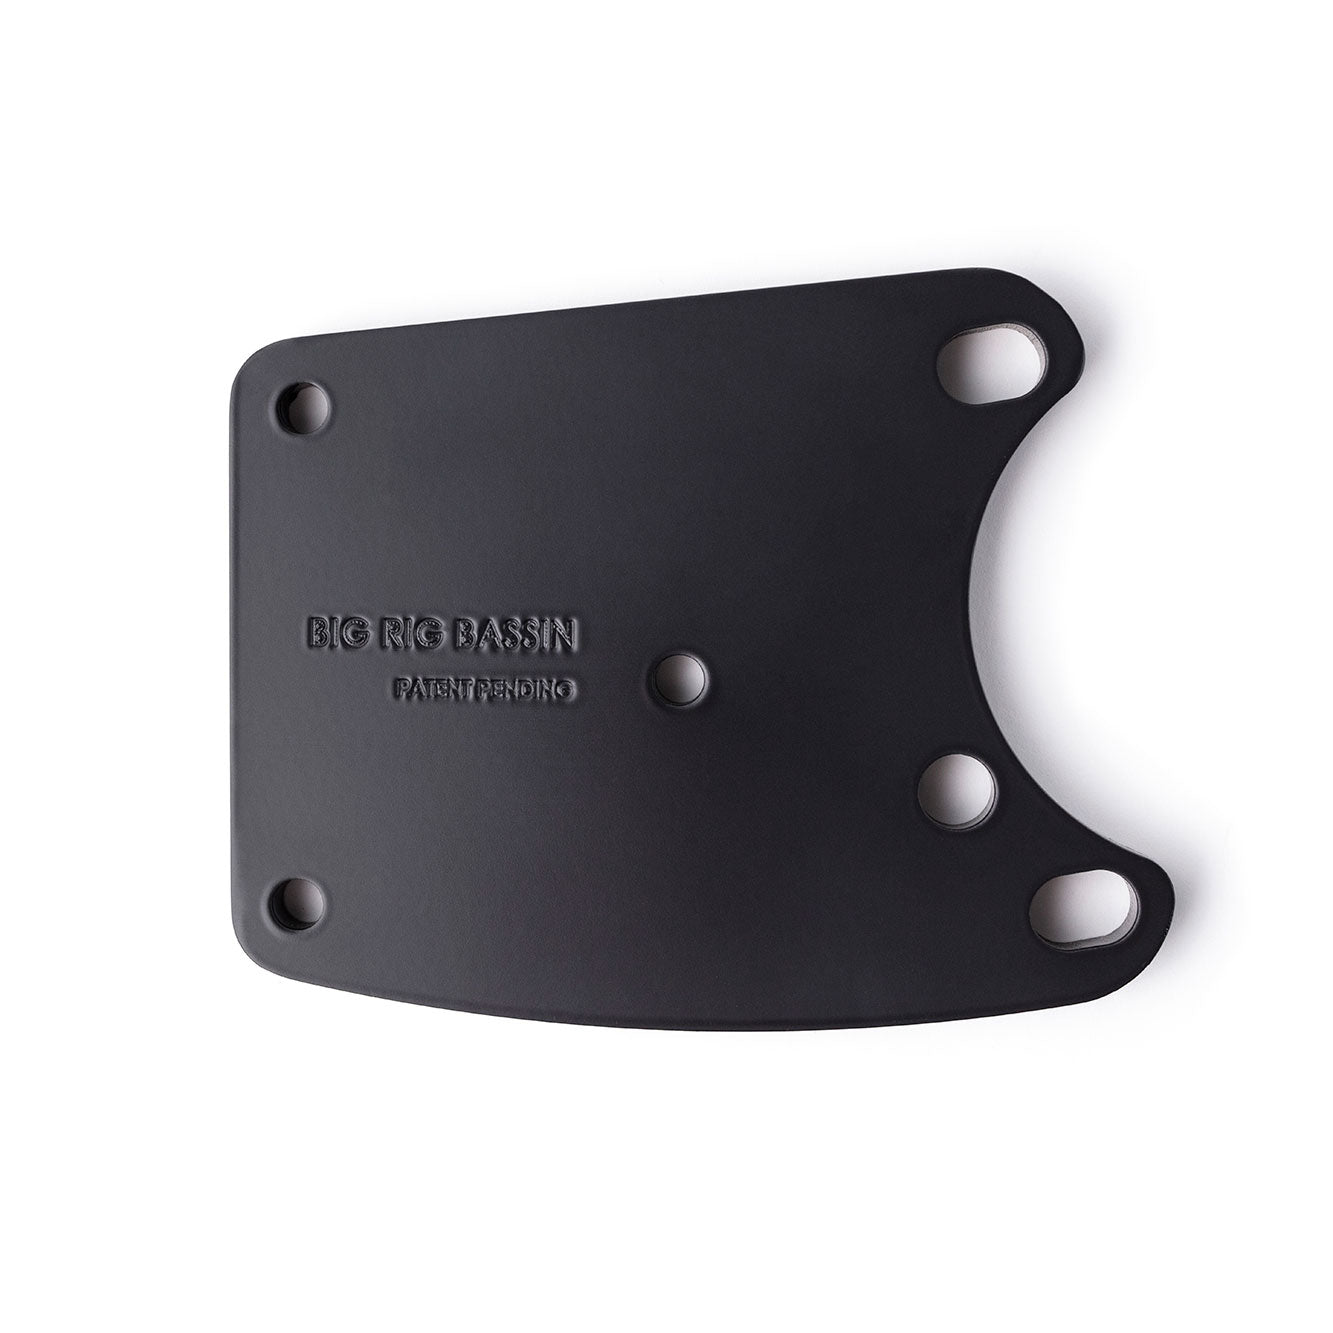 360 Sonar Quick Disconnect Mount Kit for the Garmin Force